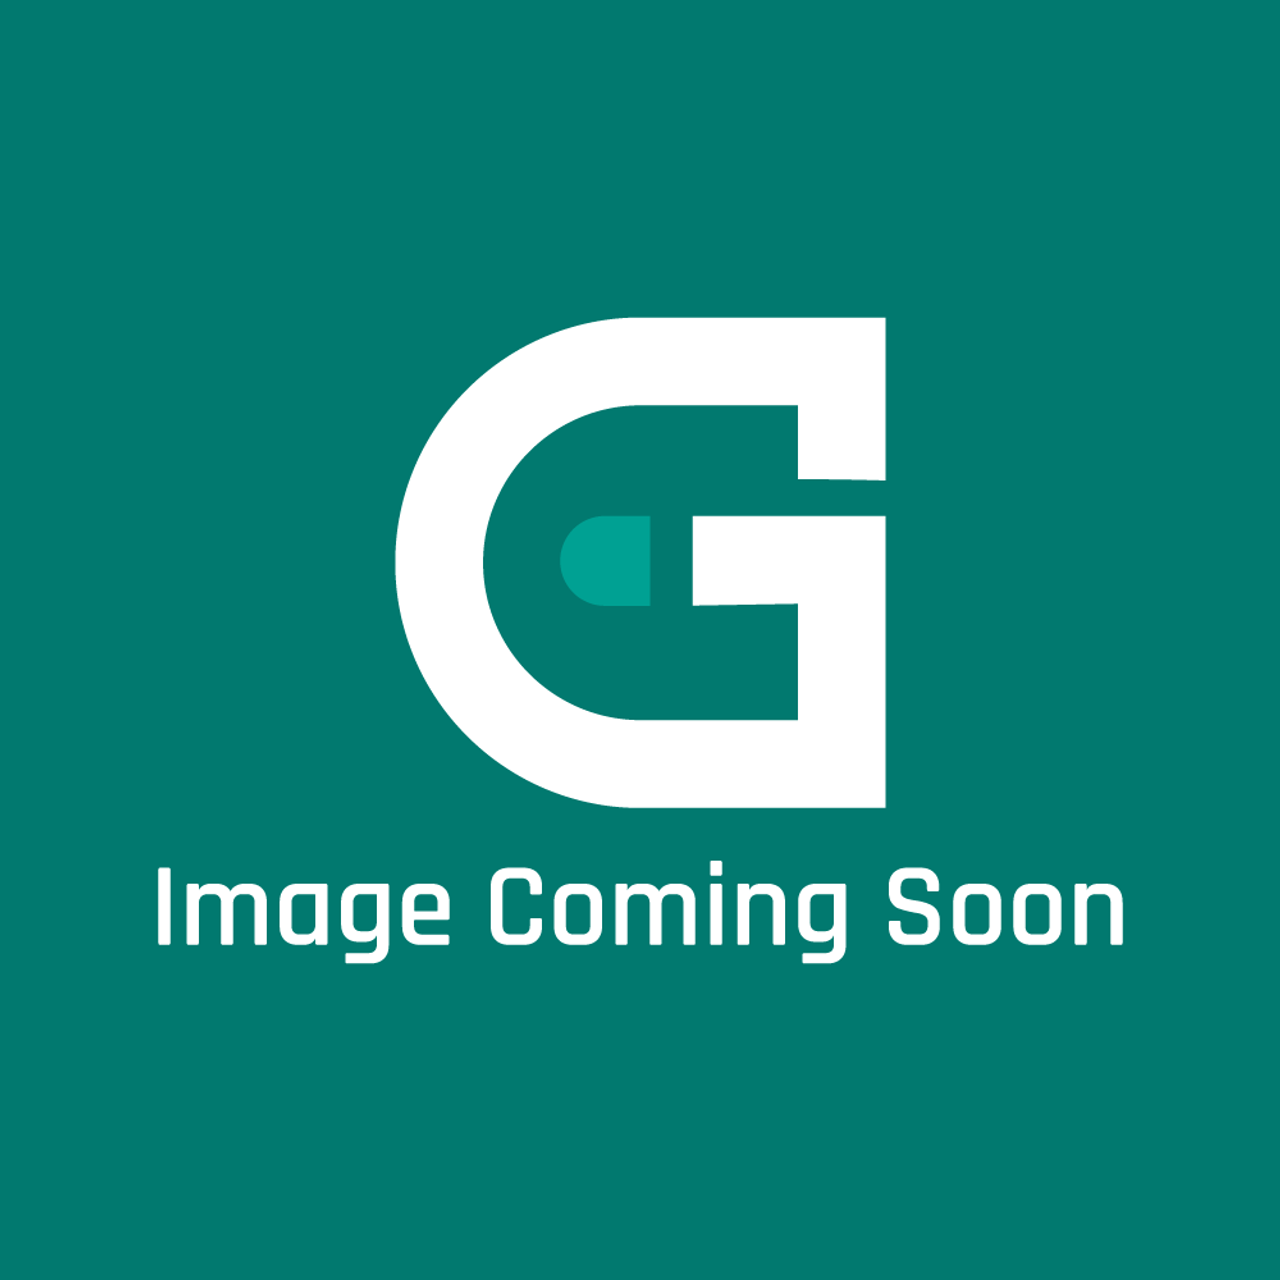 Garland G0100-36-6 - Thermostat Shield - Image Coming Soon!